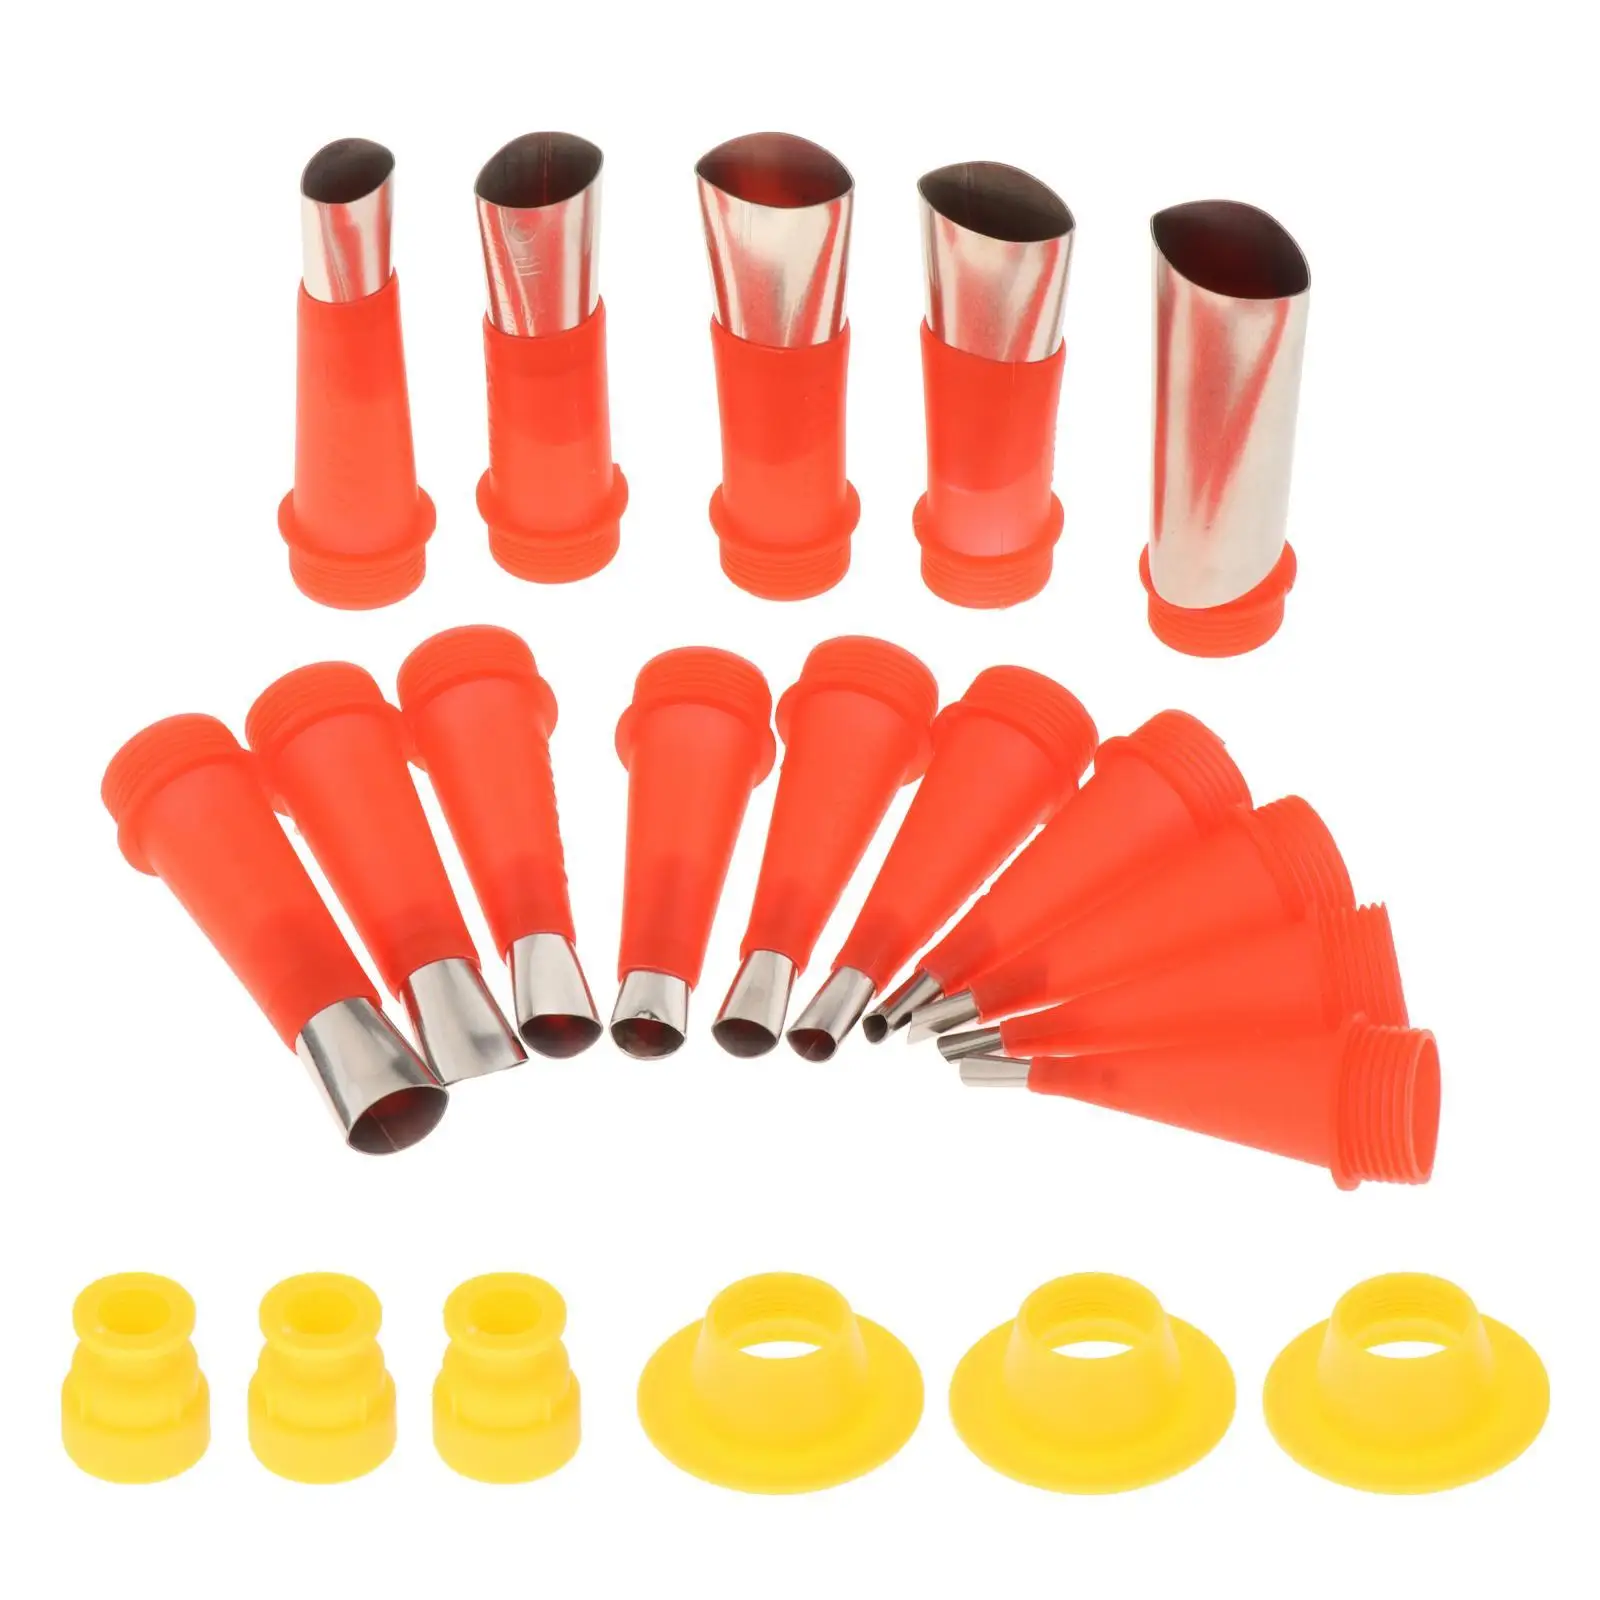 21 Pieces Stainless Steel Caulking Nozzle Tool Set Sealant Caulking Finishing Tool Caulking Finisher Nozzle Kit for Window